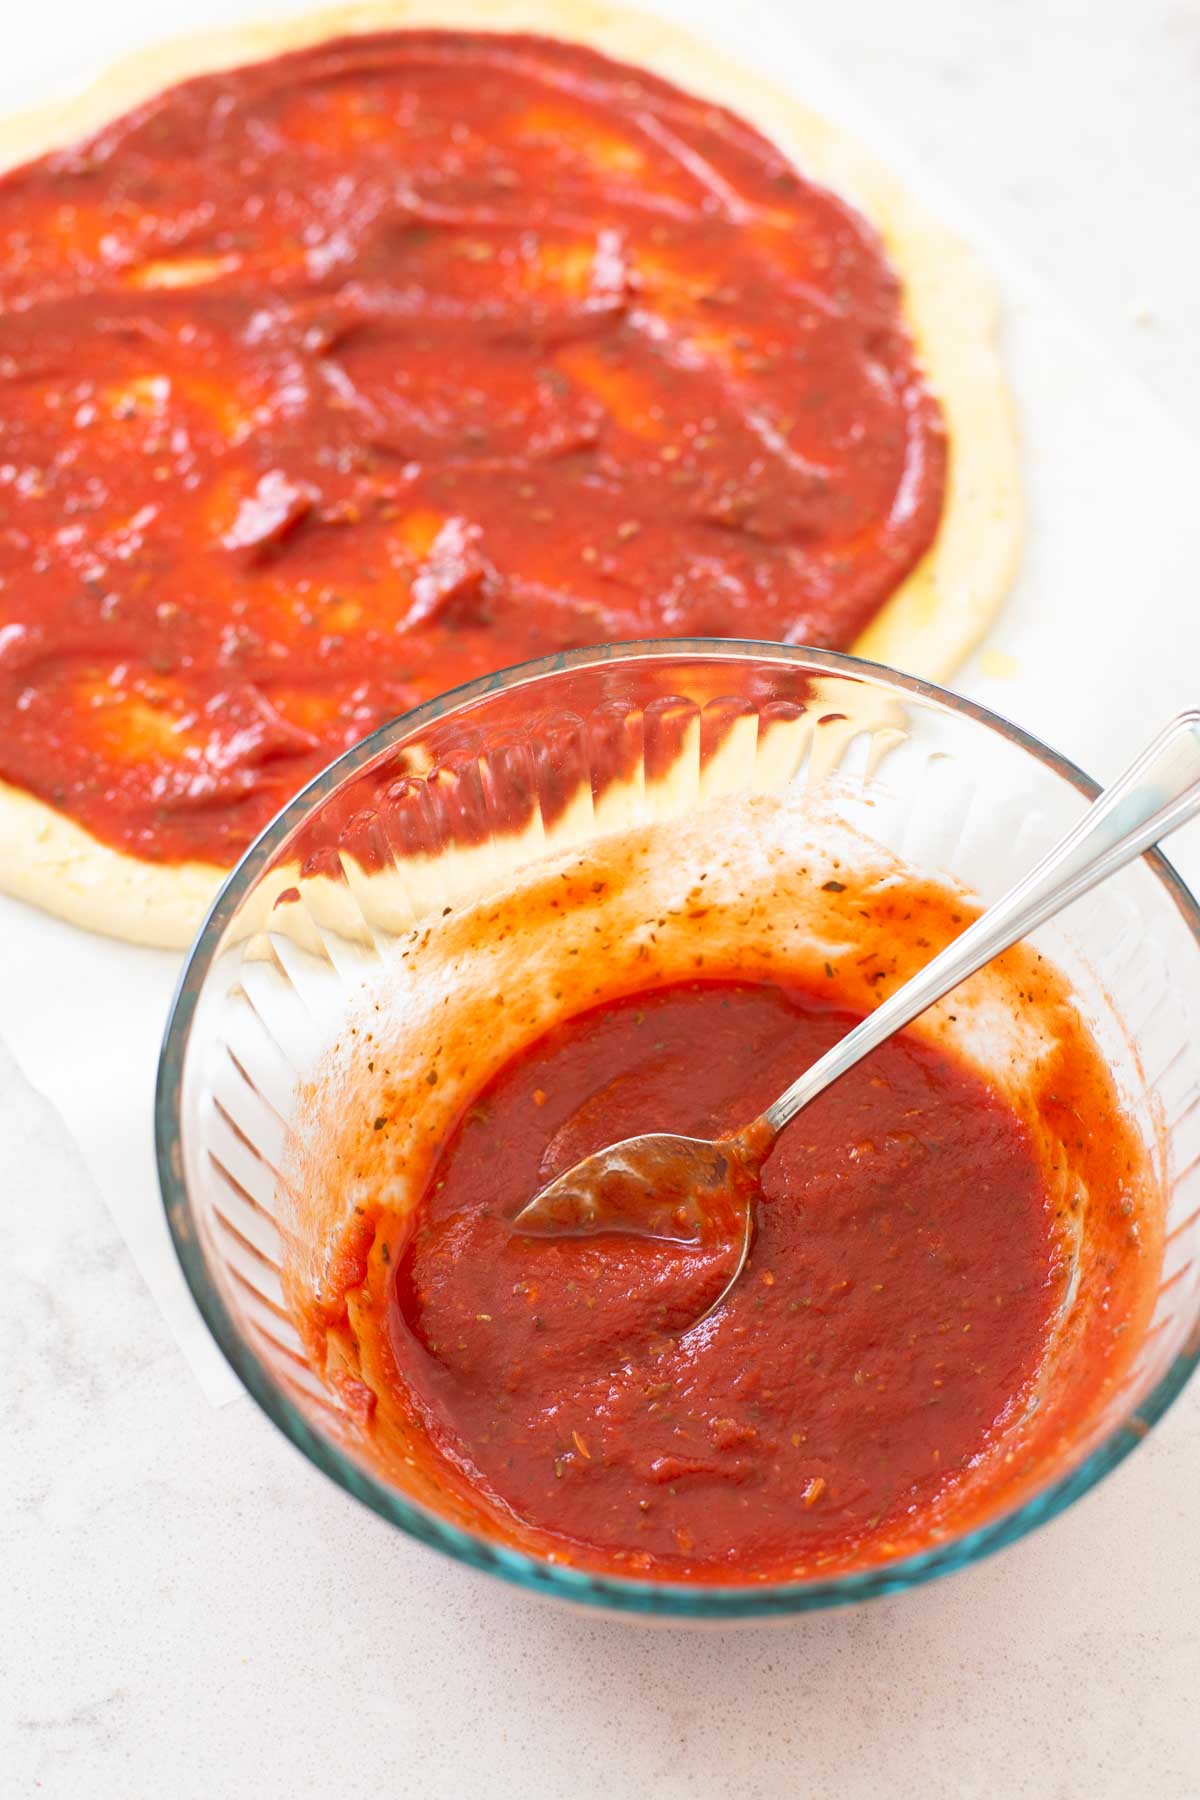 The pizza sauce is being spread onto a homemade pizza crust.